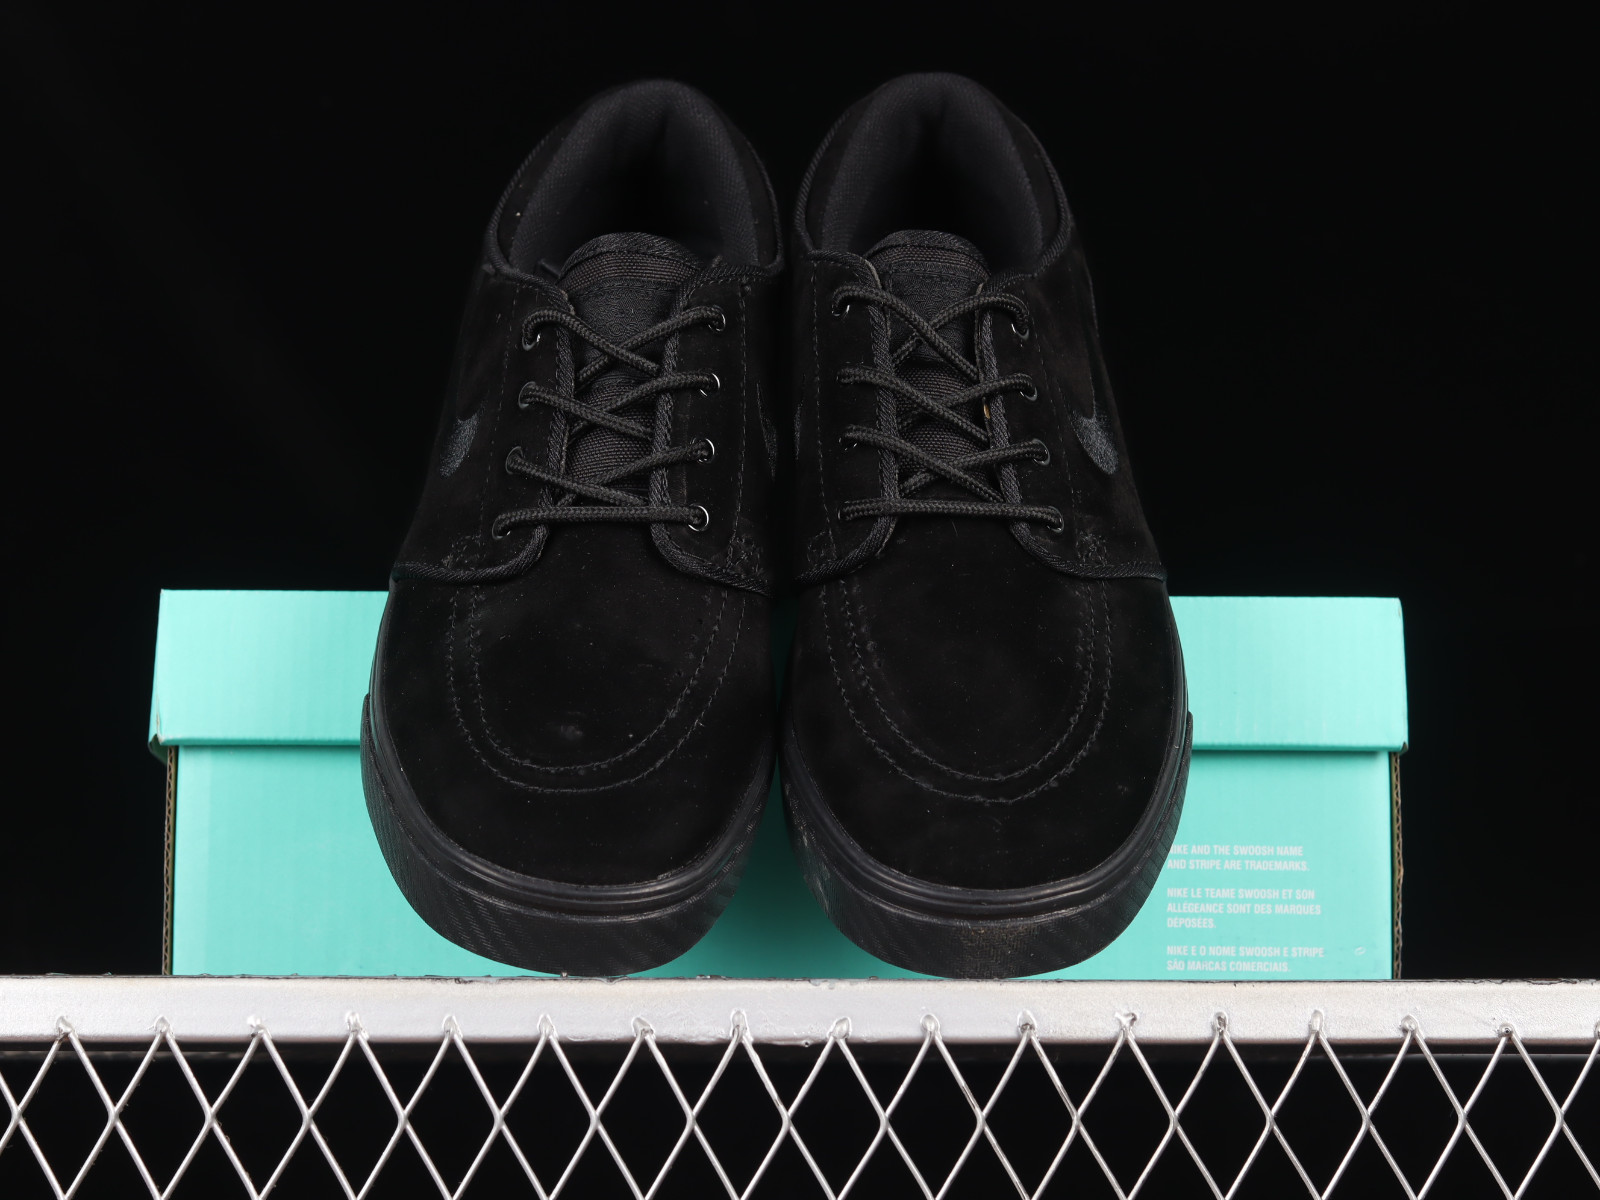 Nike SB Zoom Stefan Black - Air Force 1 Arrives In A Crisp Combo Of Sail - 001 - MultiscaleconsultingShops